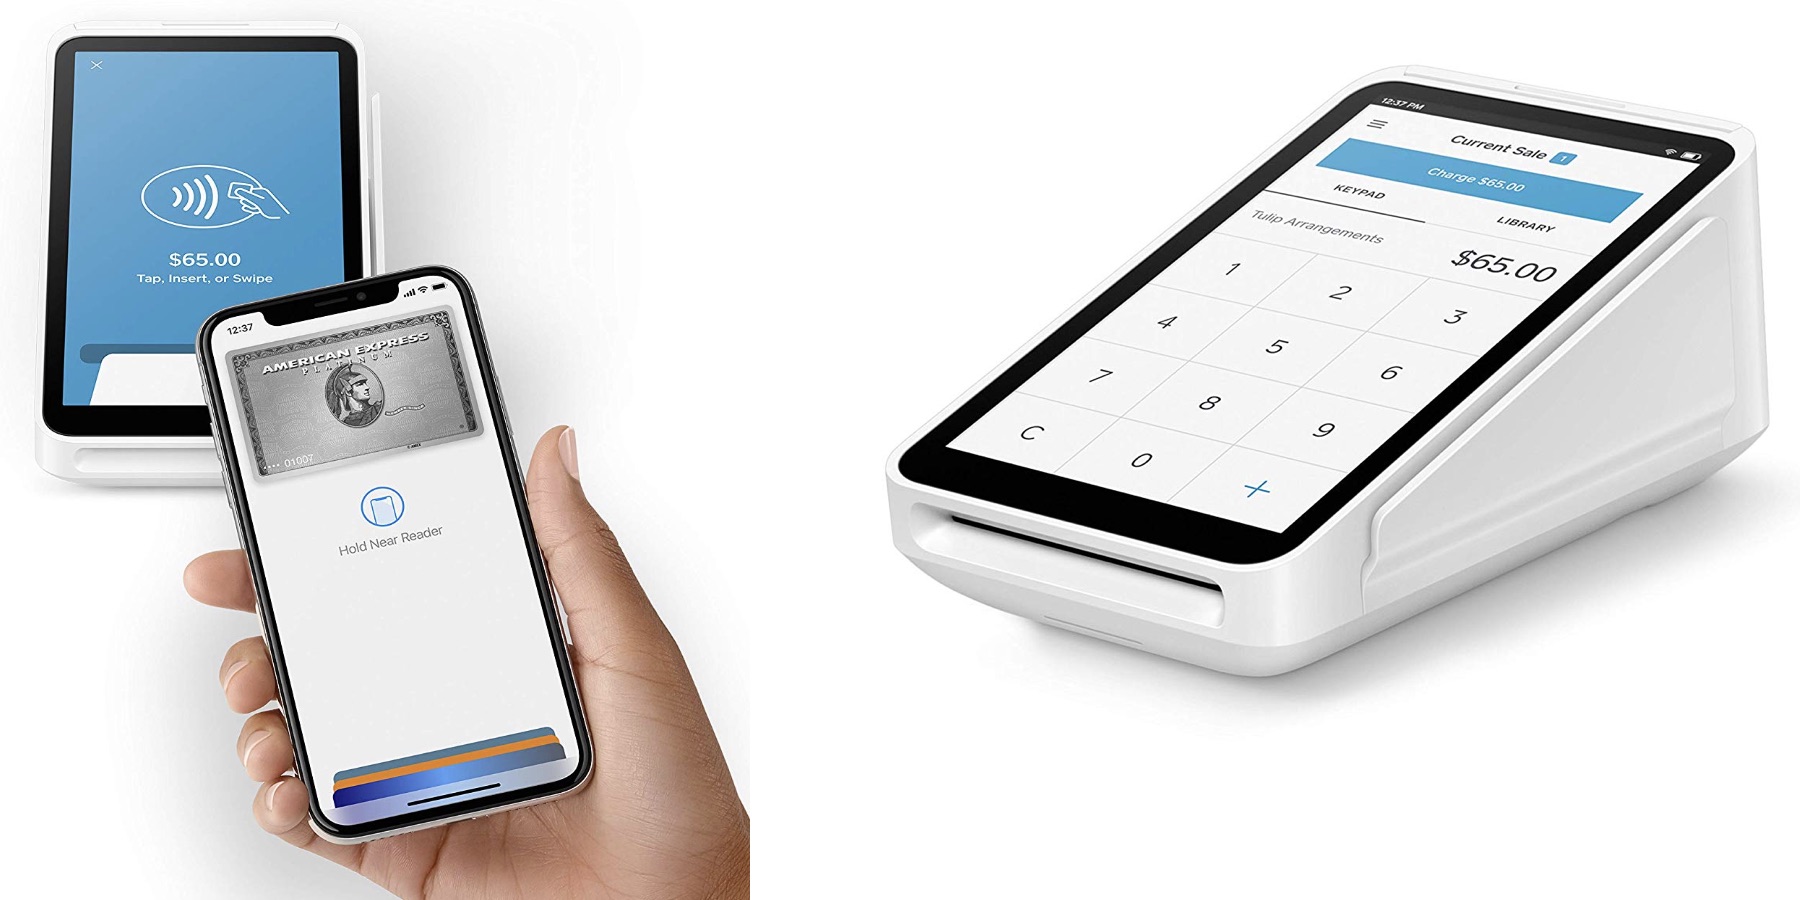 Take your biz to next level with Apple Pay: Square Terminal on